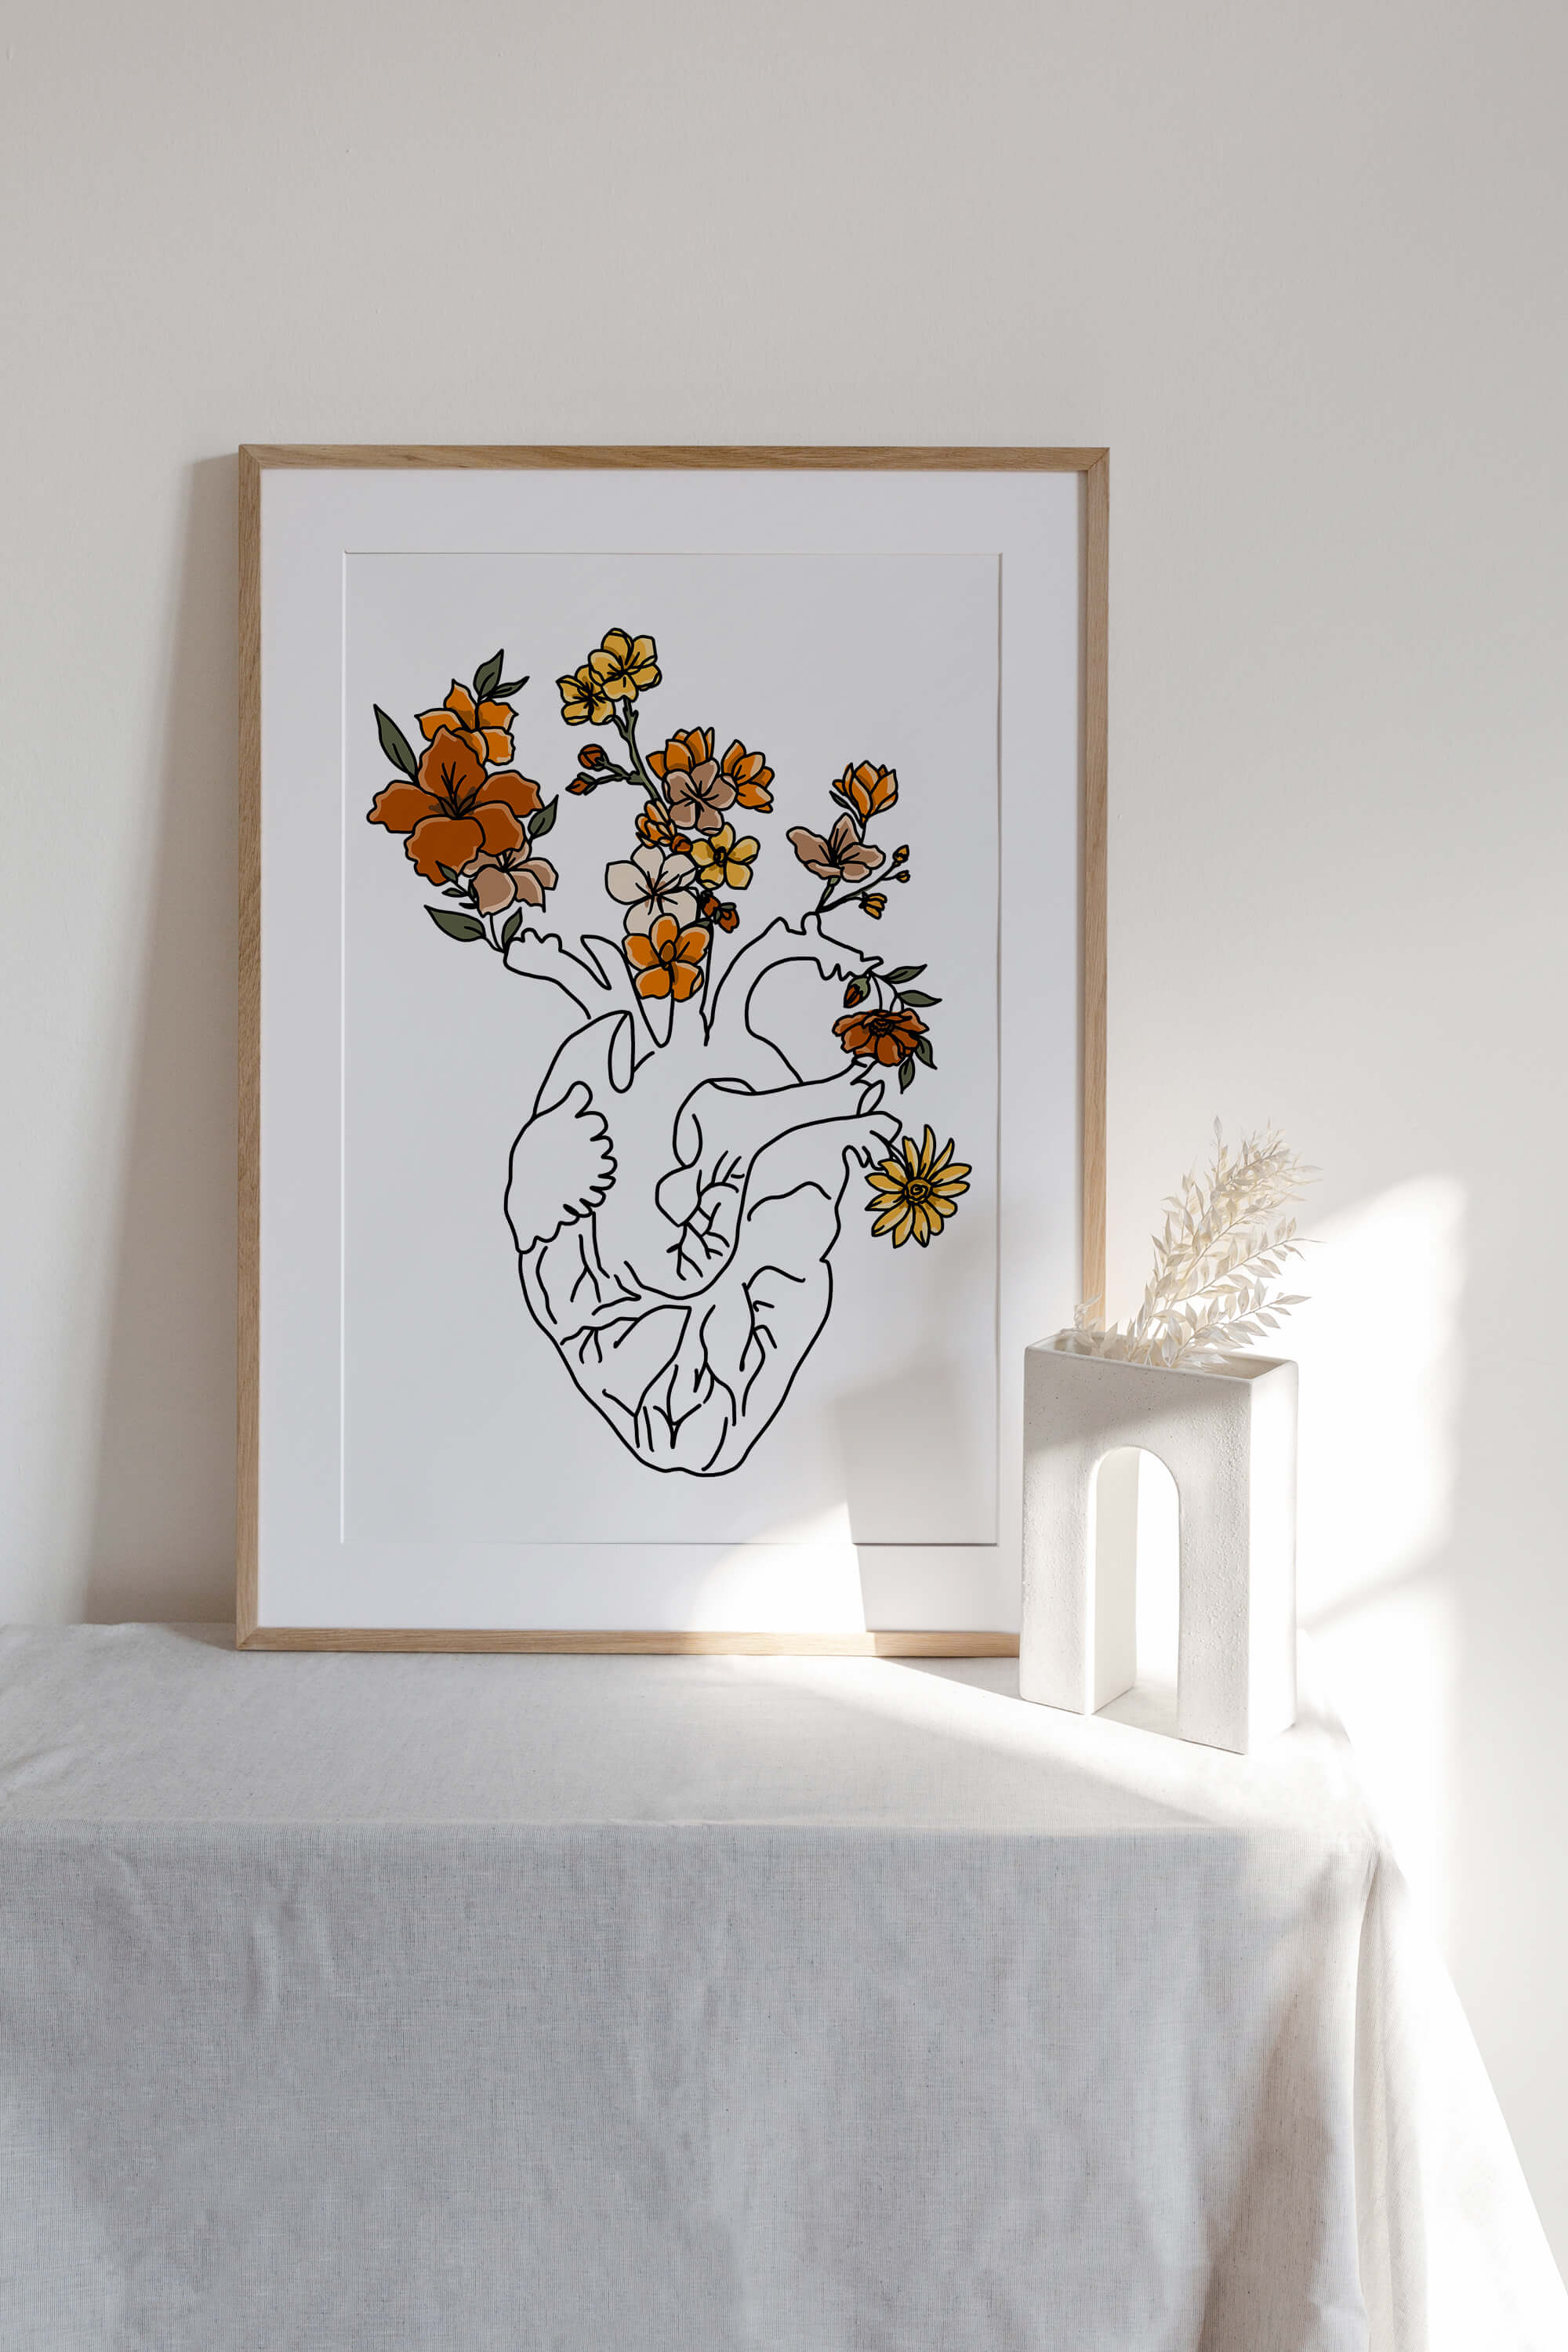 Modern Cardiology Decor with a Heart Line Art Print, celebrating love and the art of healing.